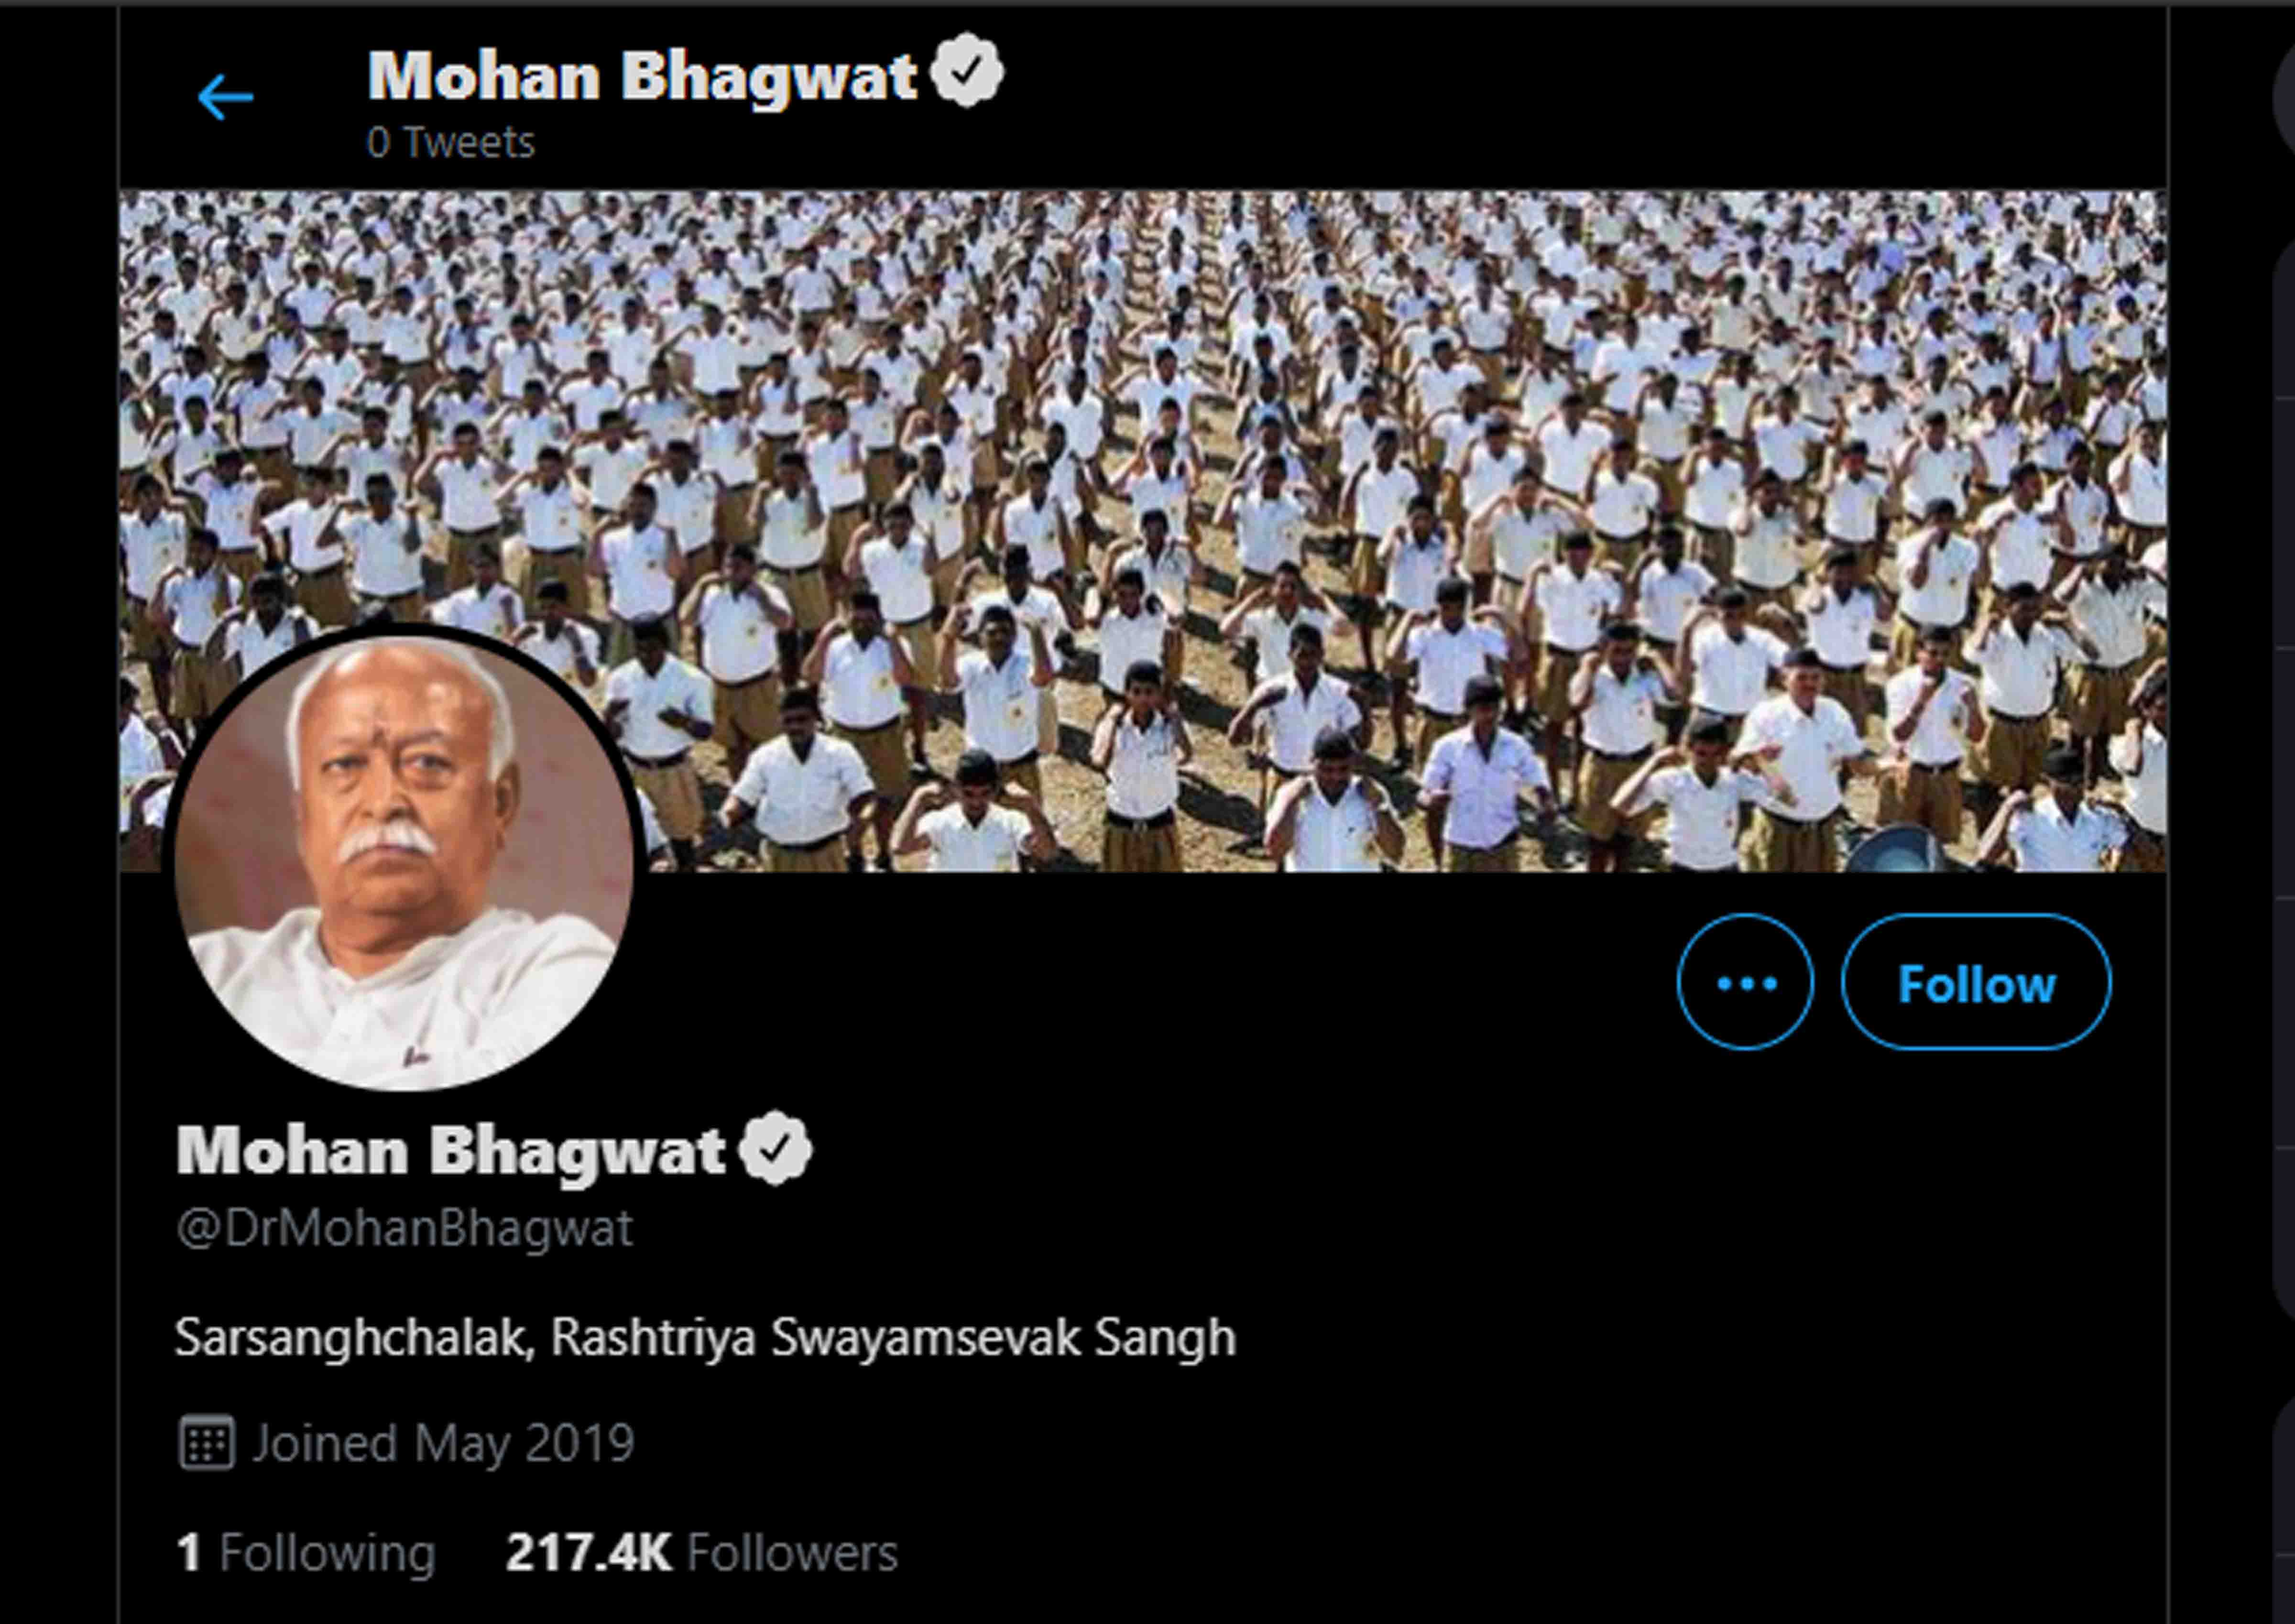 Twitter restores verified blue tick of RSS chief Mohan Bhagwat’s personal account